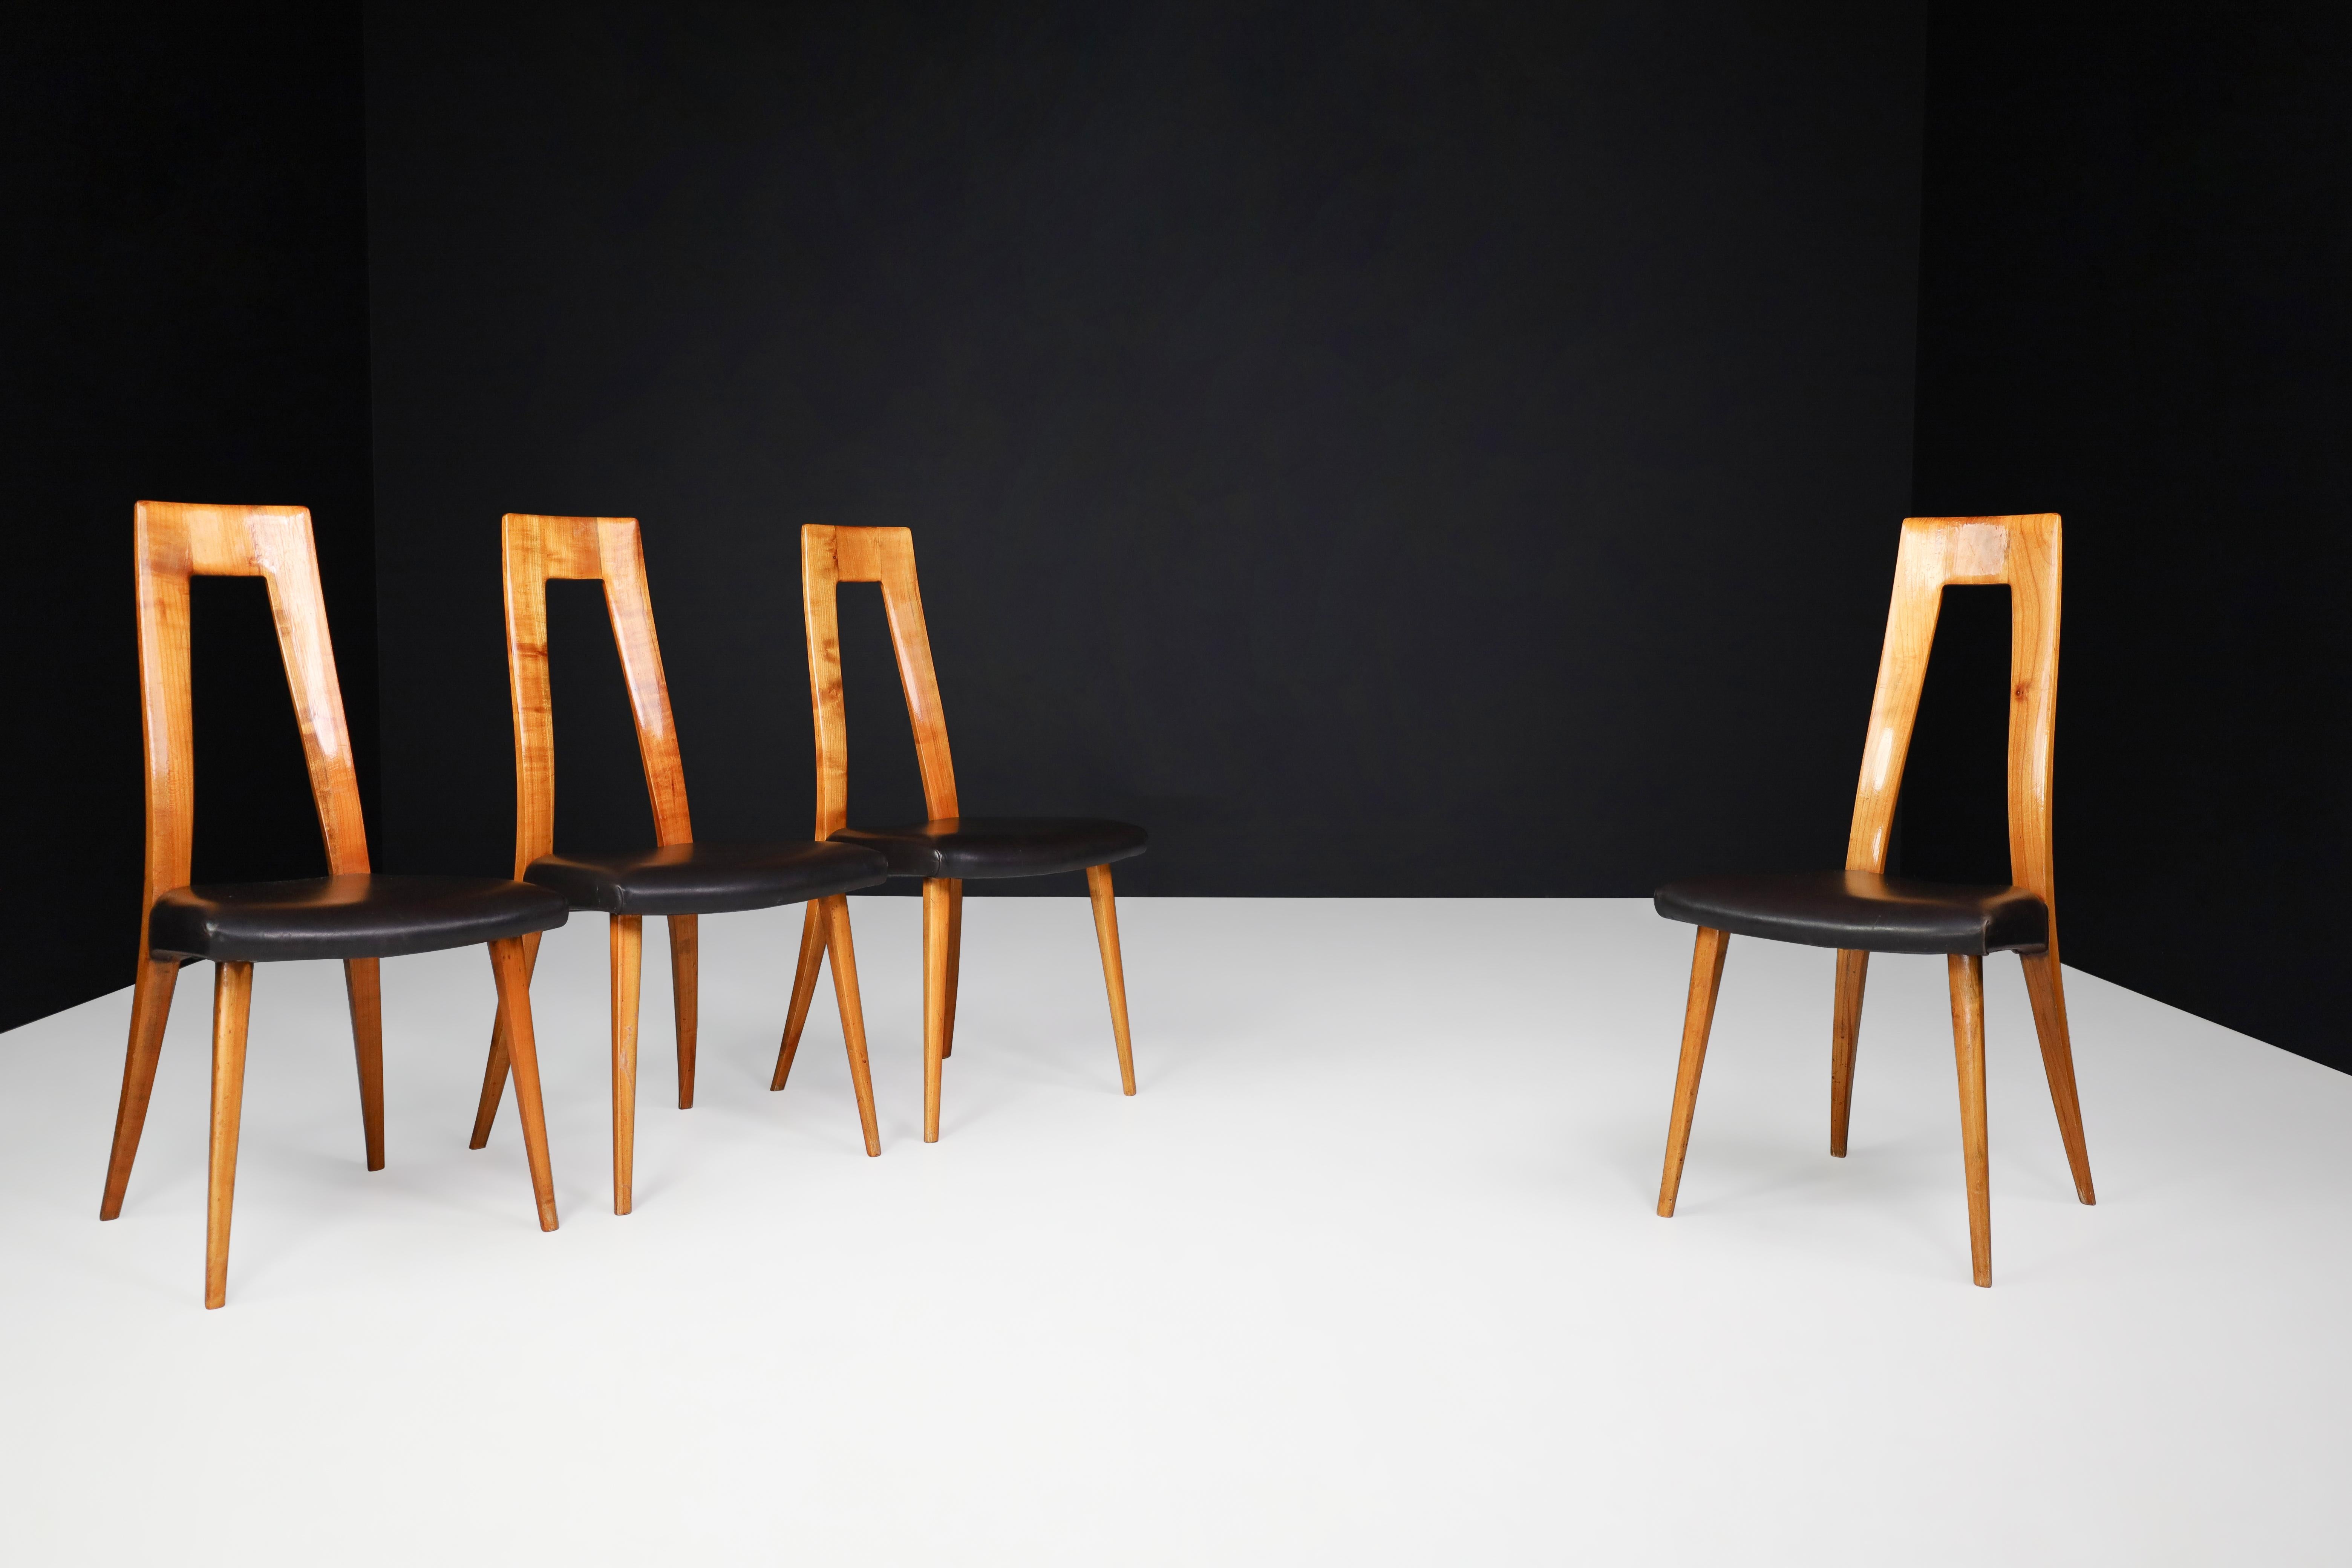 Ernst Martin Dettinger cherry wood and black Leather Dining Chairs, Germany, 1960s

A Mid-Century Modern set of four cherry wood and black leather dining chairs by Ernst Martin Dettinger was made in Germany in the 1960s. They are in excellent